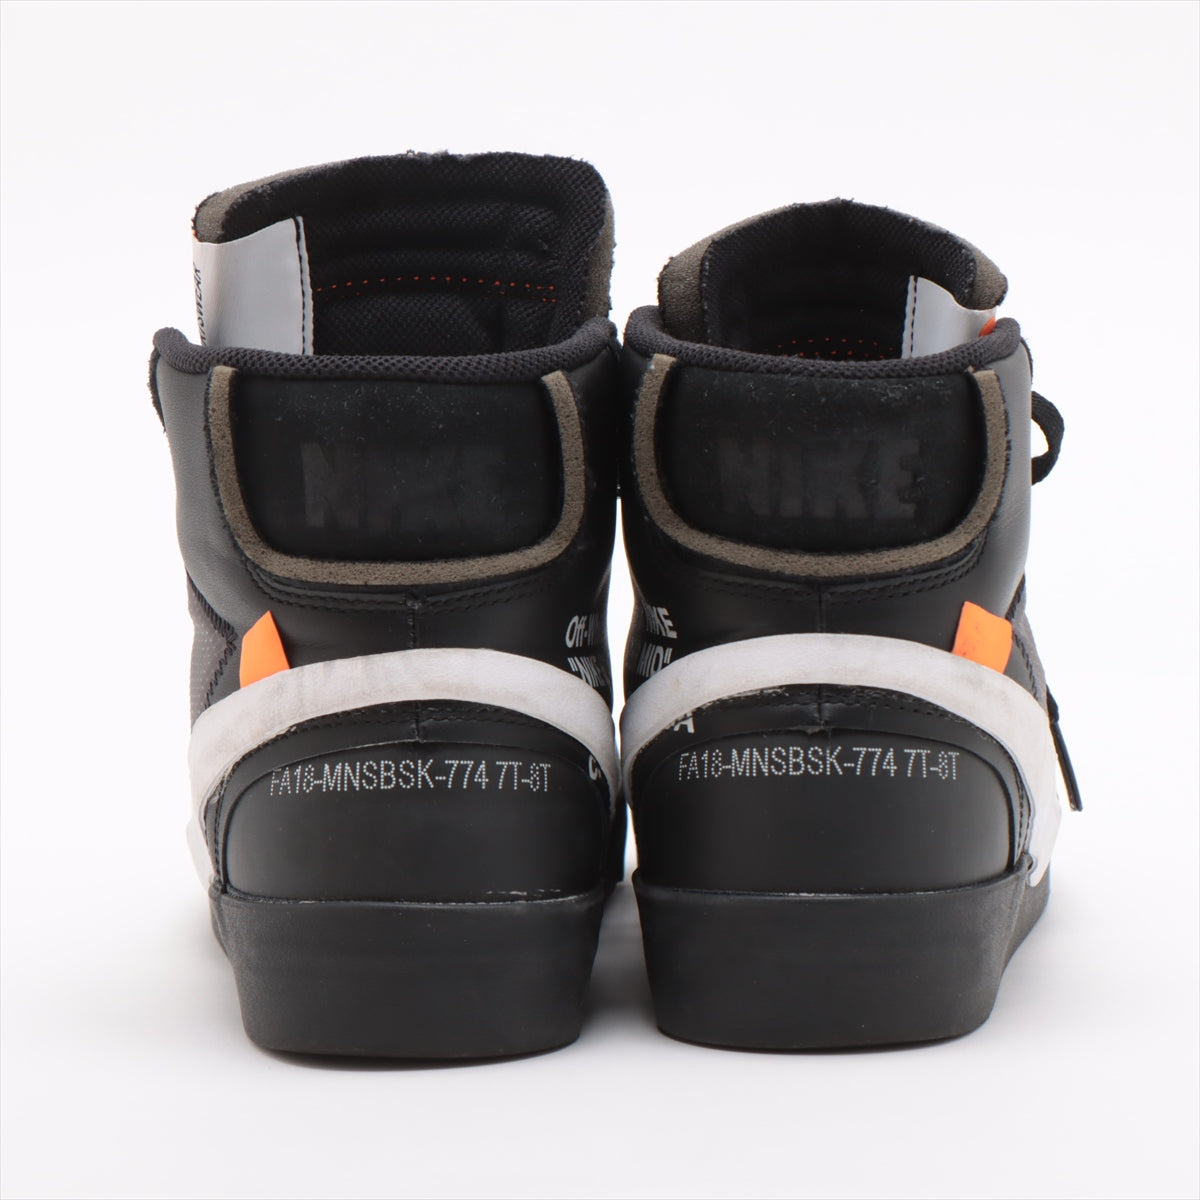 NIKE × OFF-WHITE Leather x fabric High-top Sneakers 25.5cm Men's Black x Gray AA3832-001 THE 10 BLAZER STUDIO MID Band missing